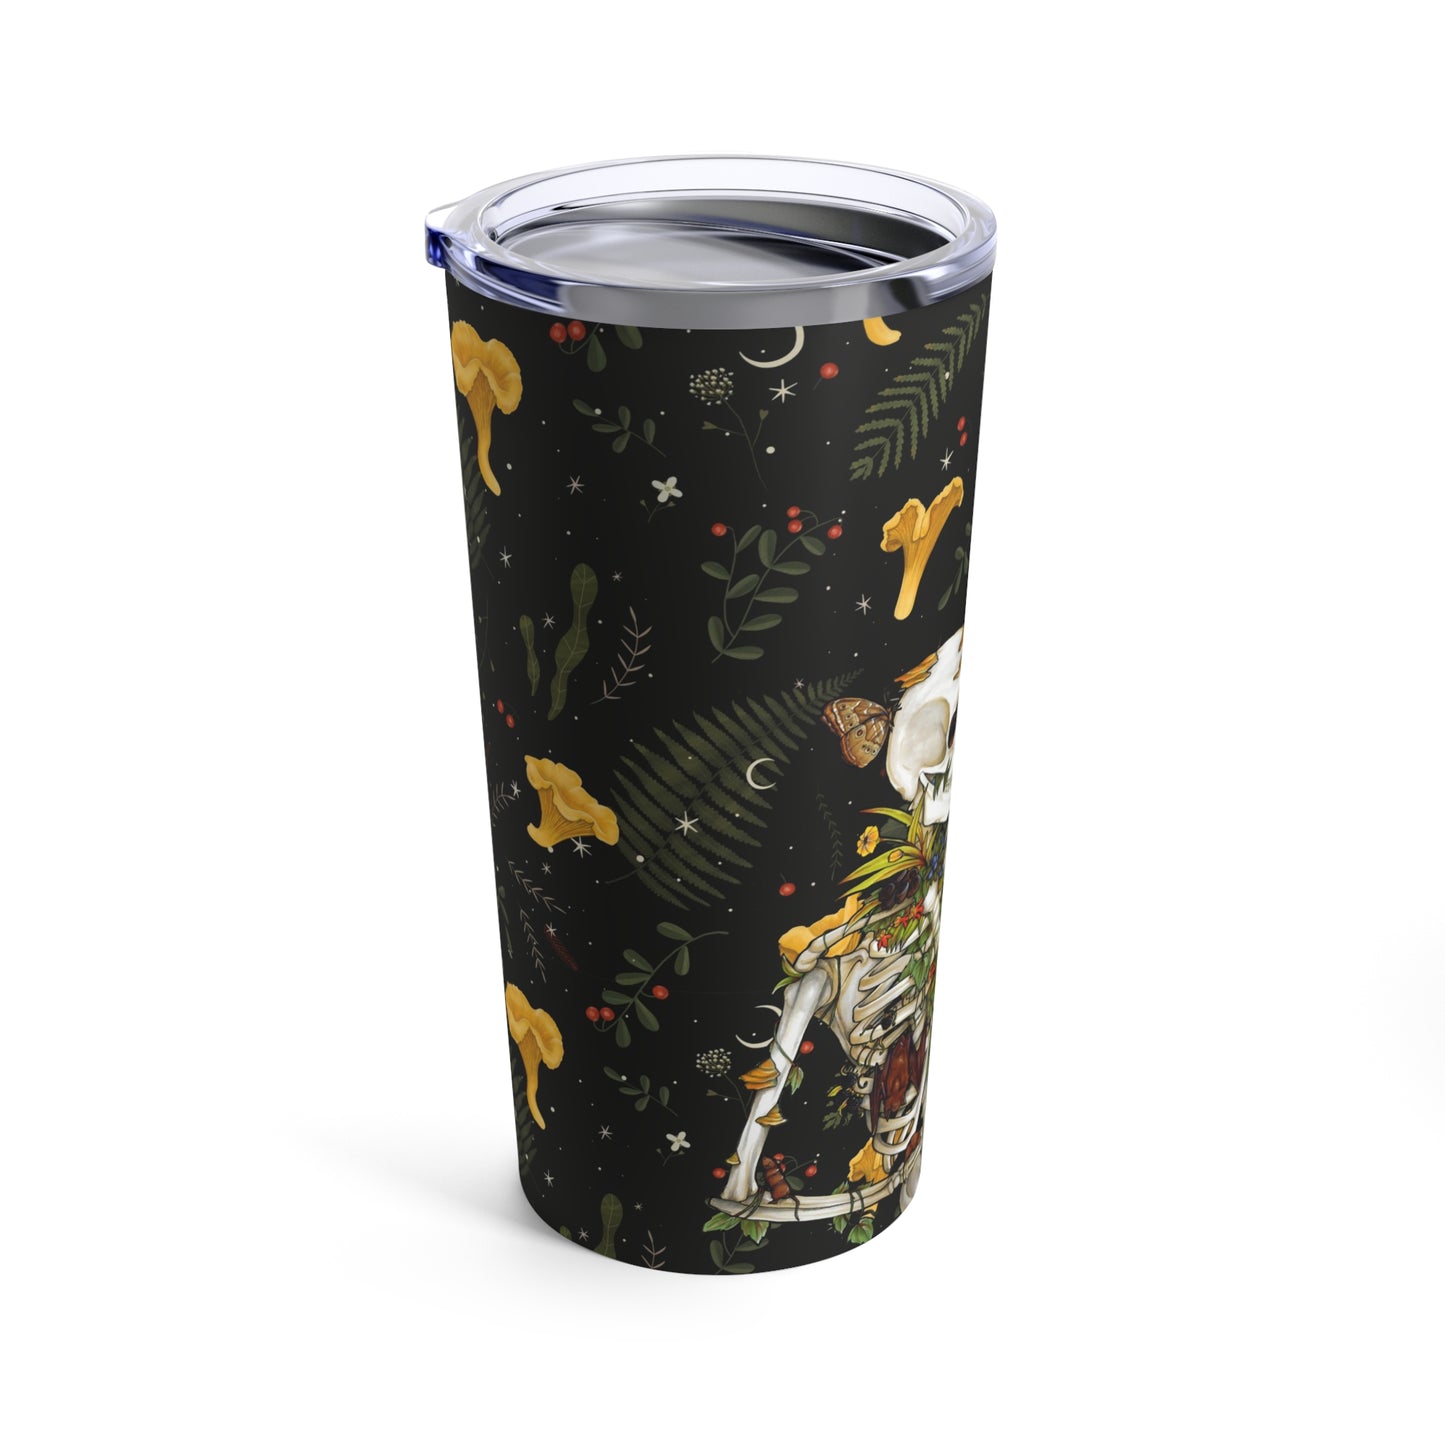 Skeleton Tumbler 20oz for him or her. Dark academia style with mushrooms and skeleton. Gothic tumbler for her or him.